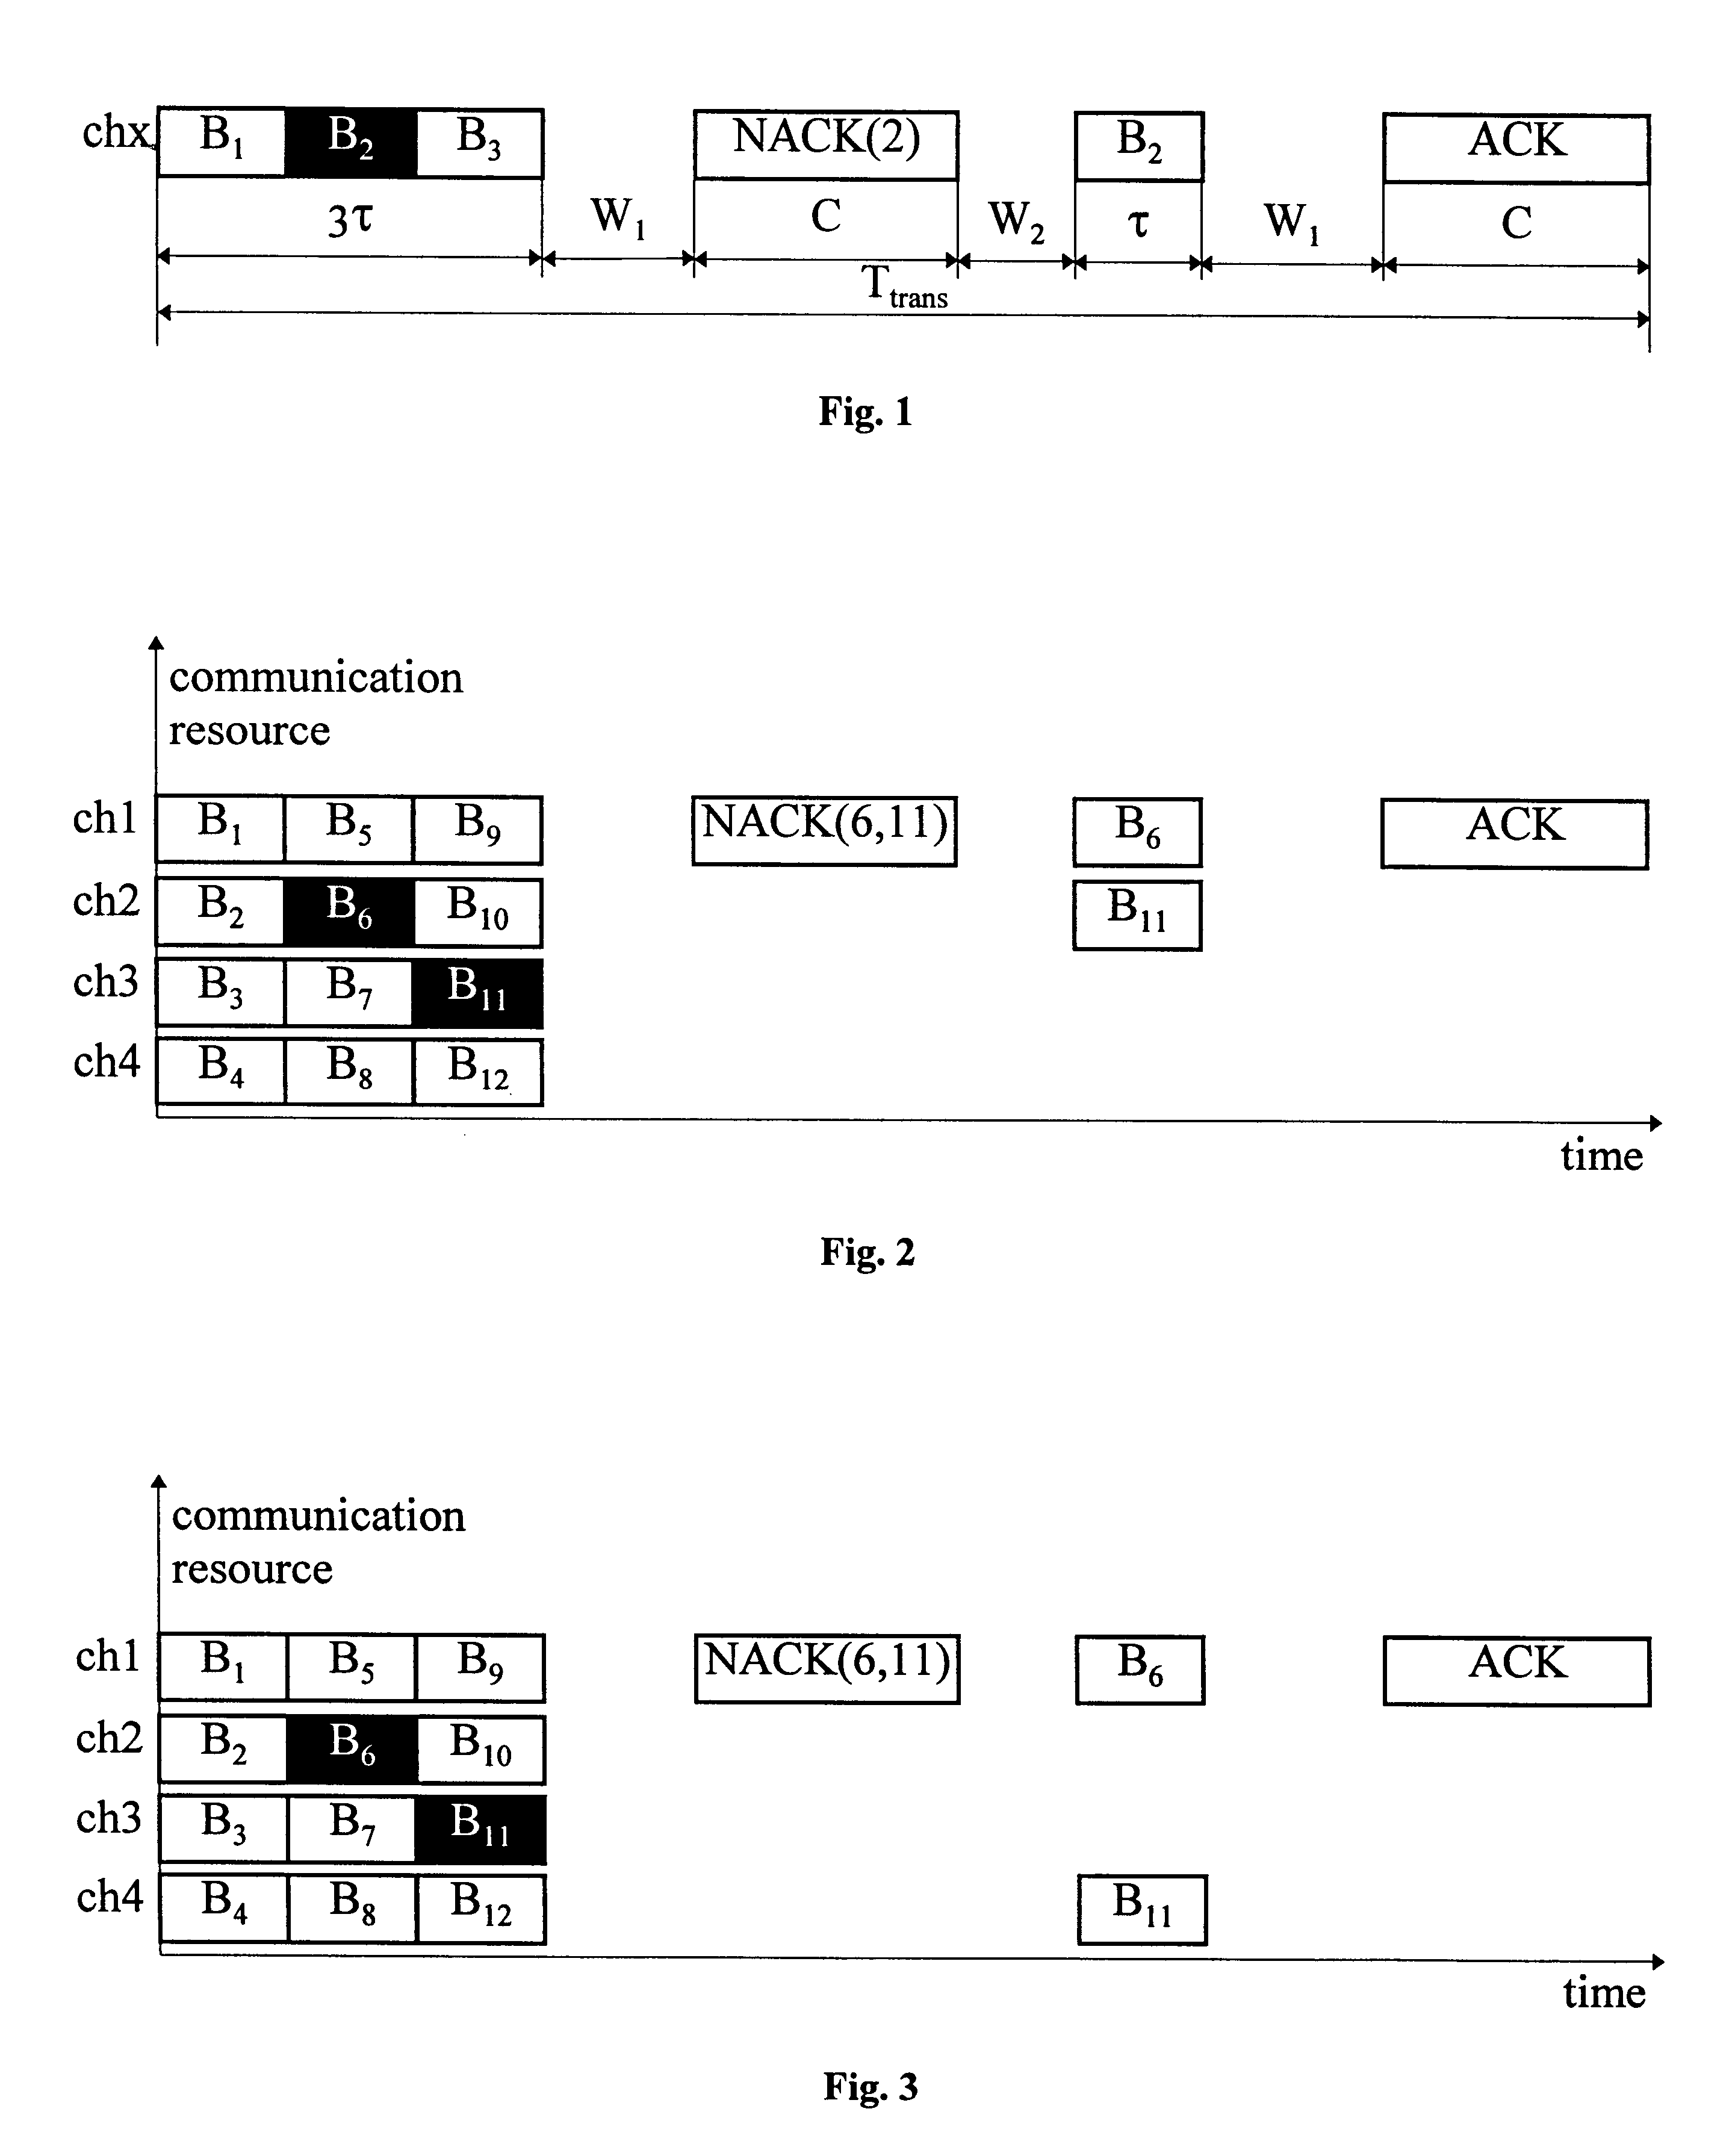 Digital telecommunication system with selected combination of coding schemes and designated resources for packet transmission based on estimated transmission time